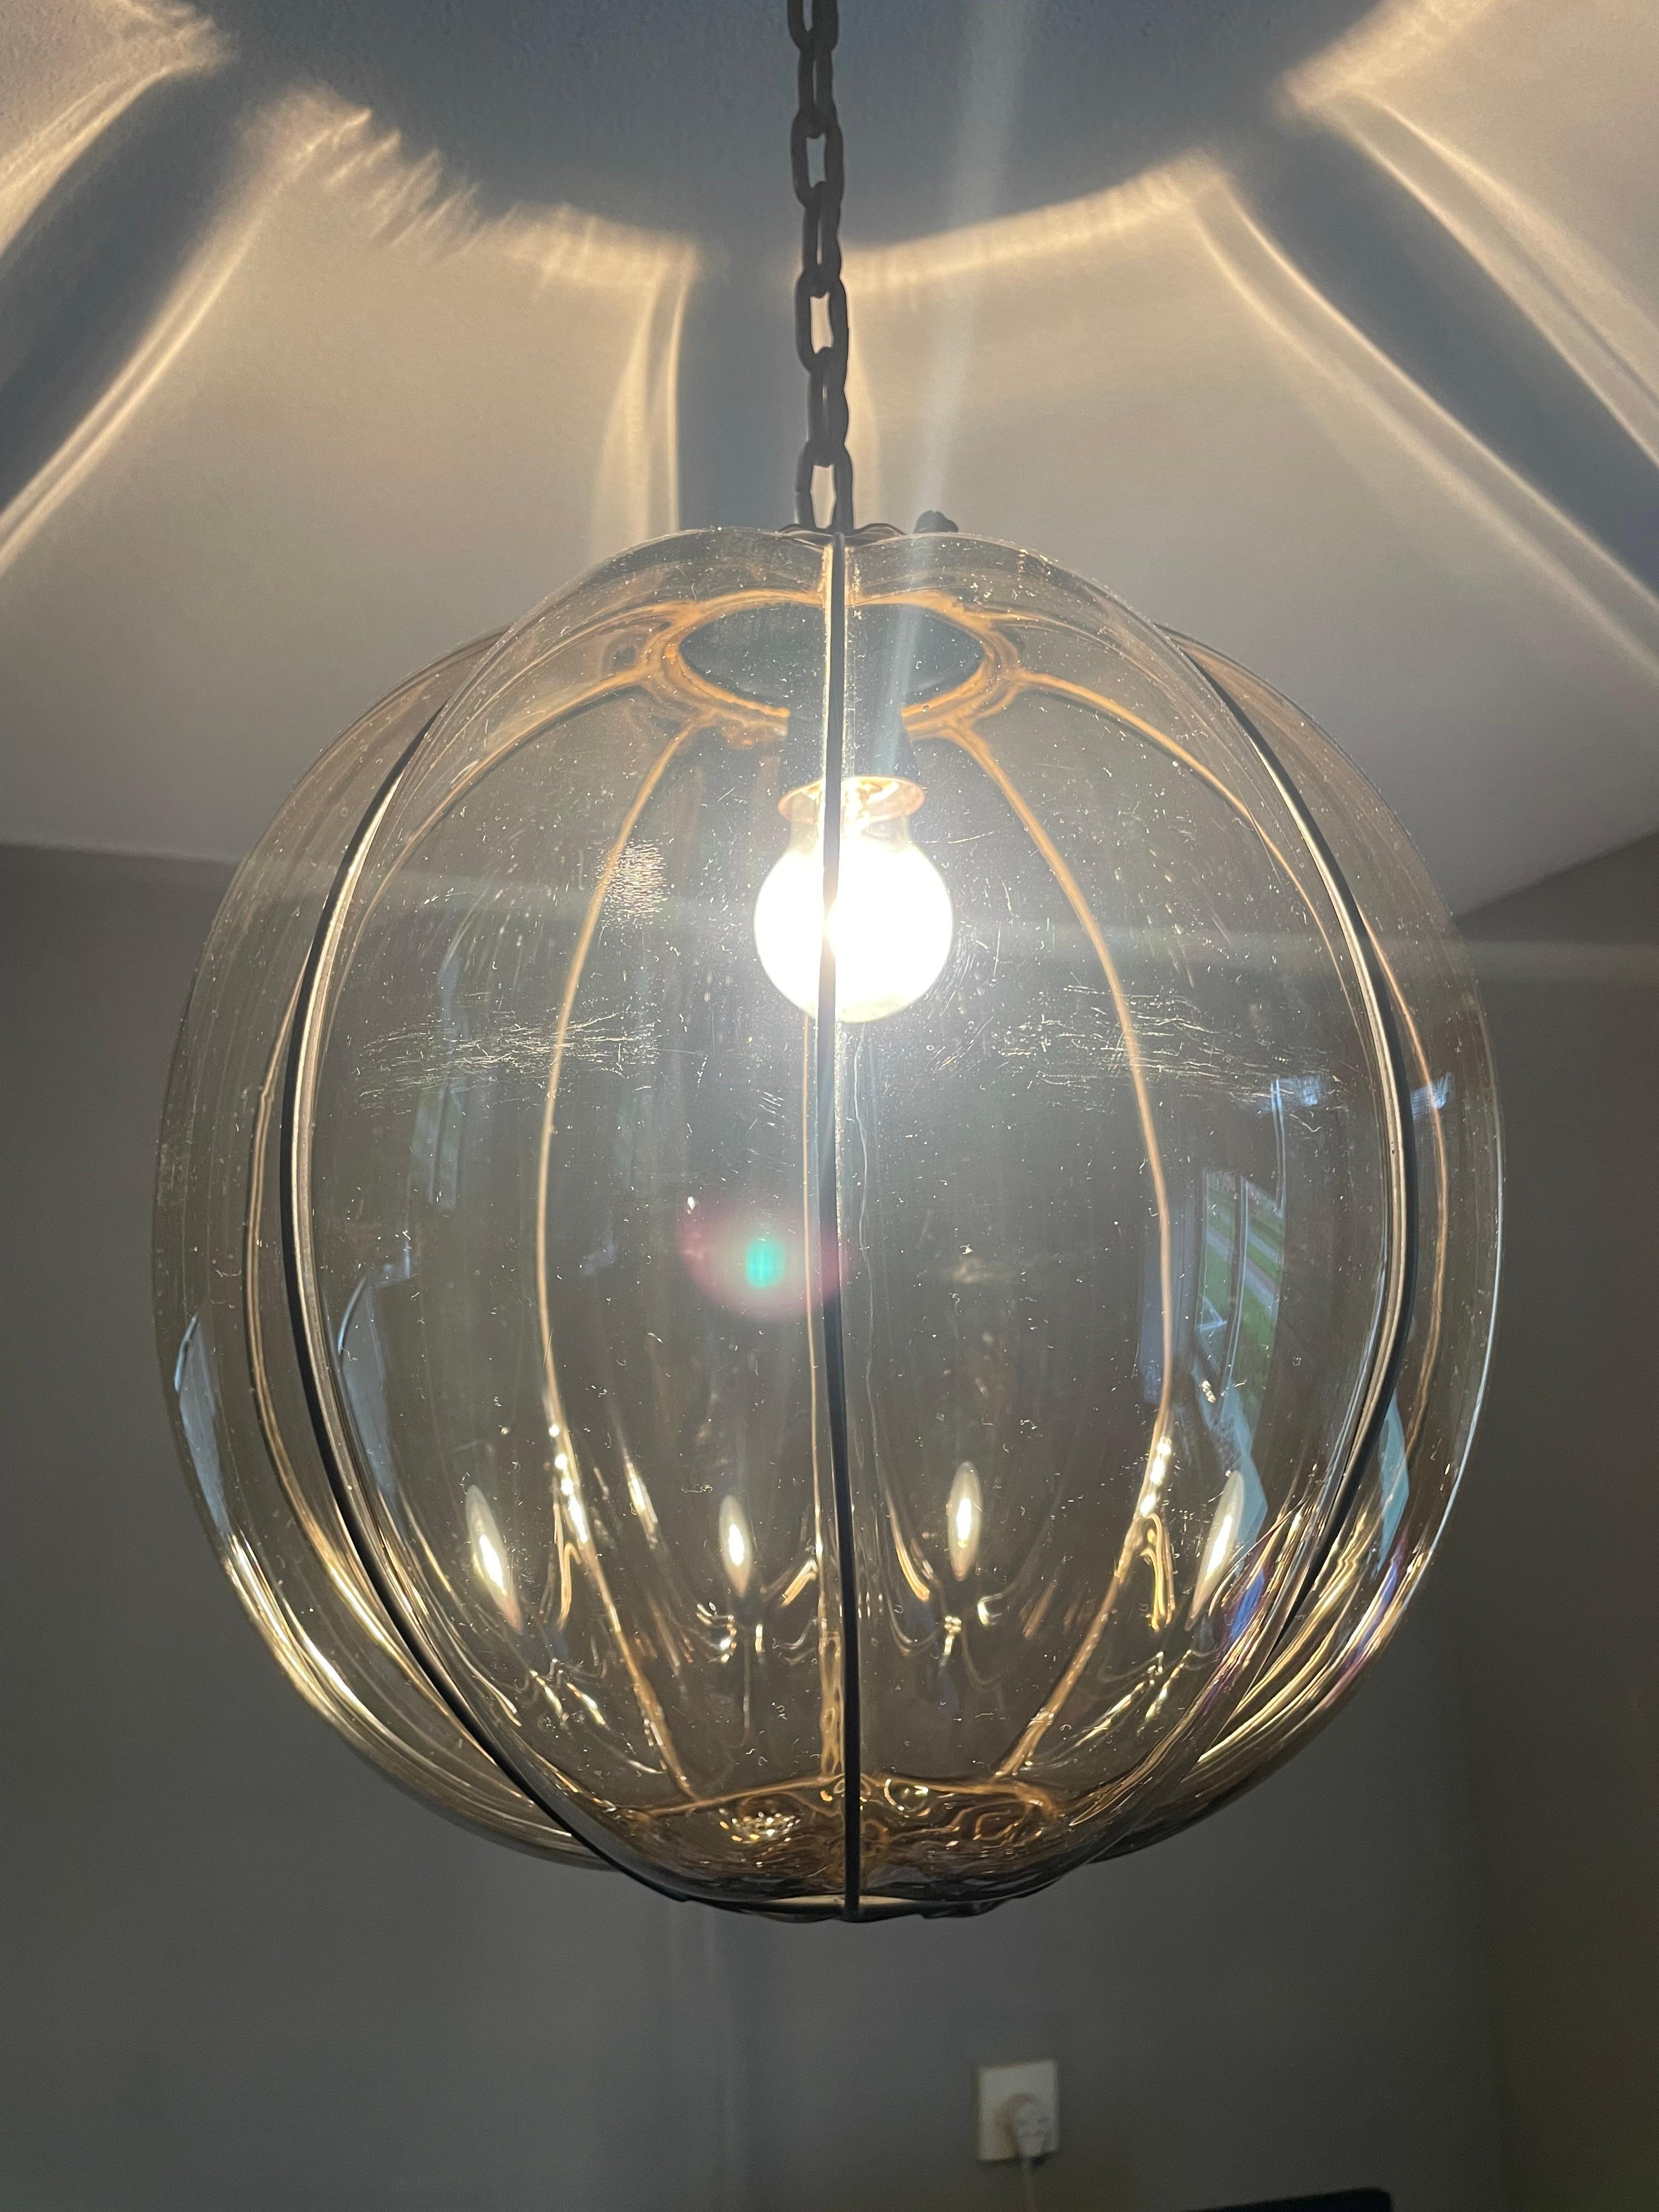 Rare Midcentury Venetian Mouth Blown Glass in Iron Frame Pendant / Chandelier For Sale 2